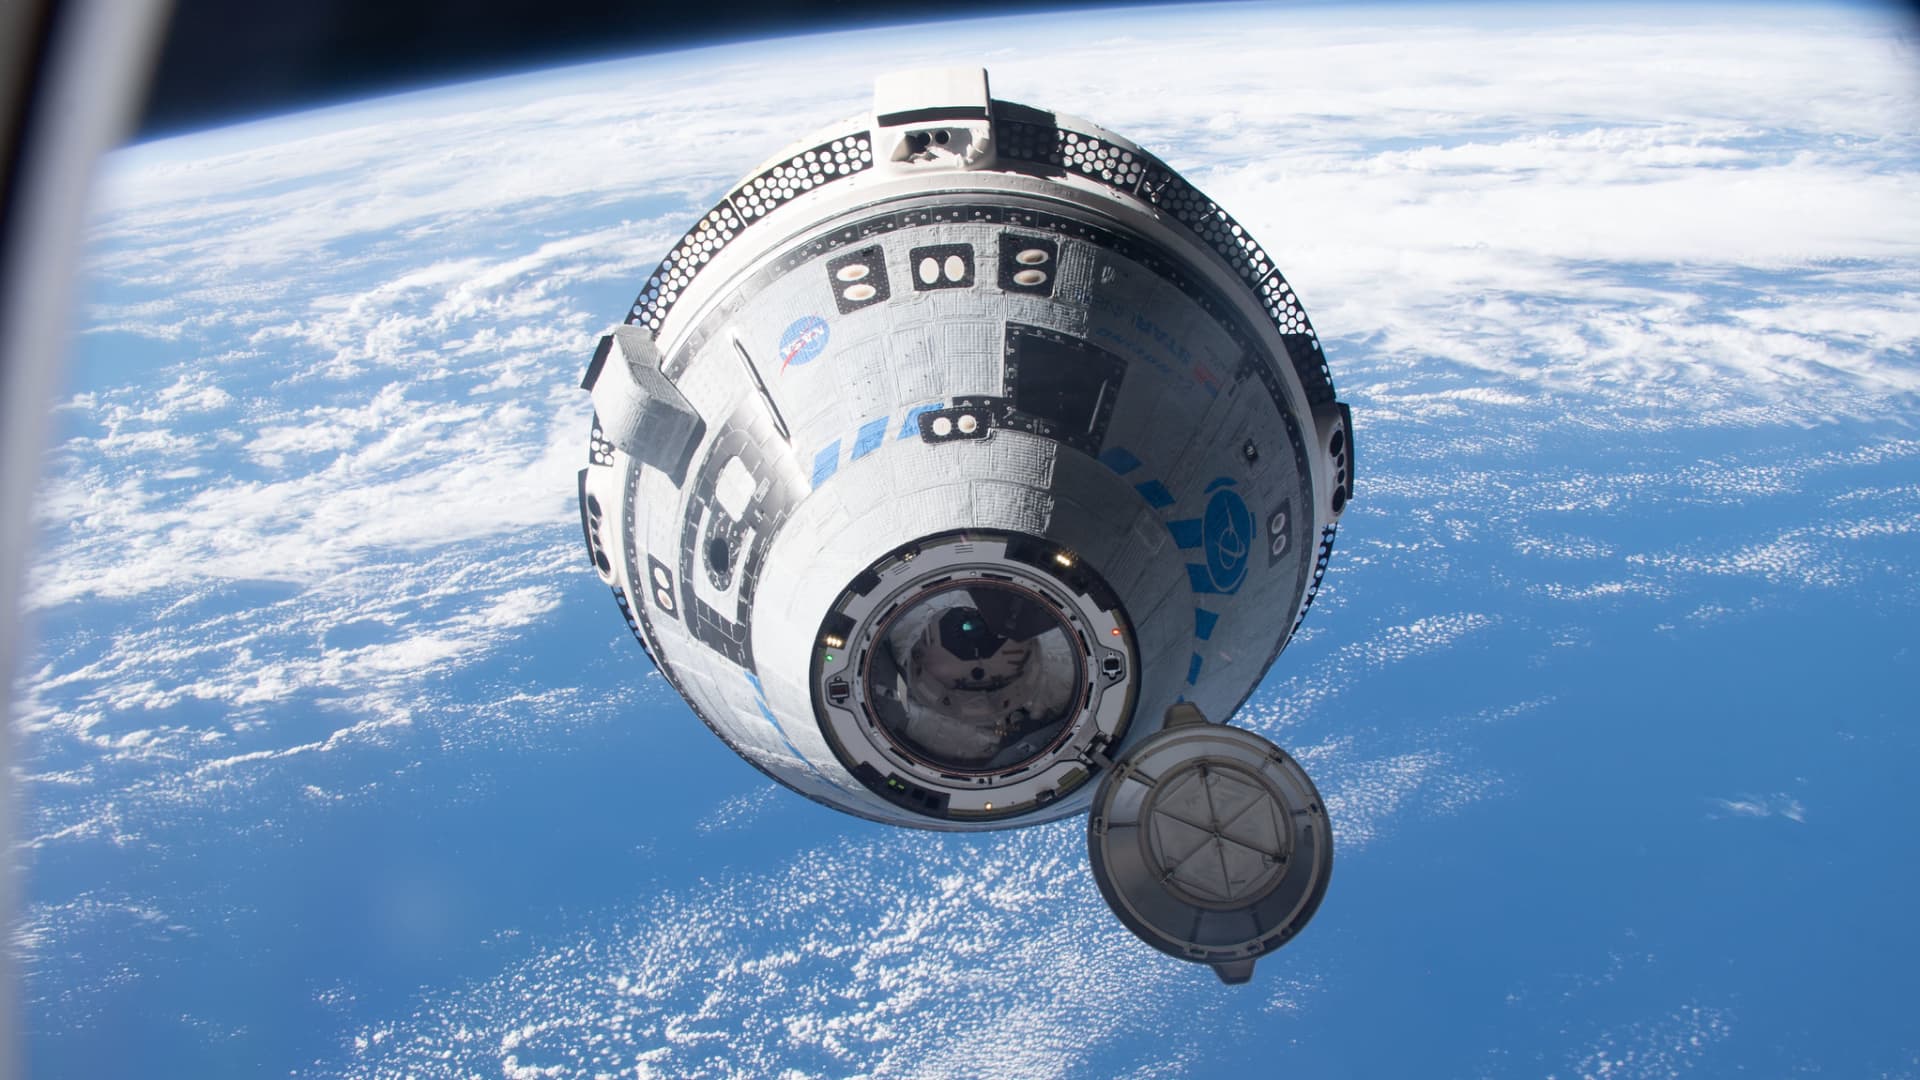 Boeing takes additional charge for Starliner astronaut capsule, bringing cost overruns to near 0 million